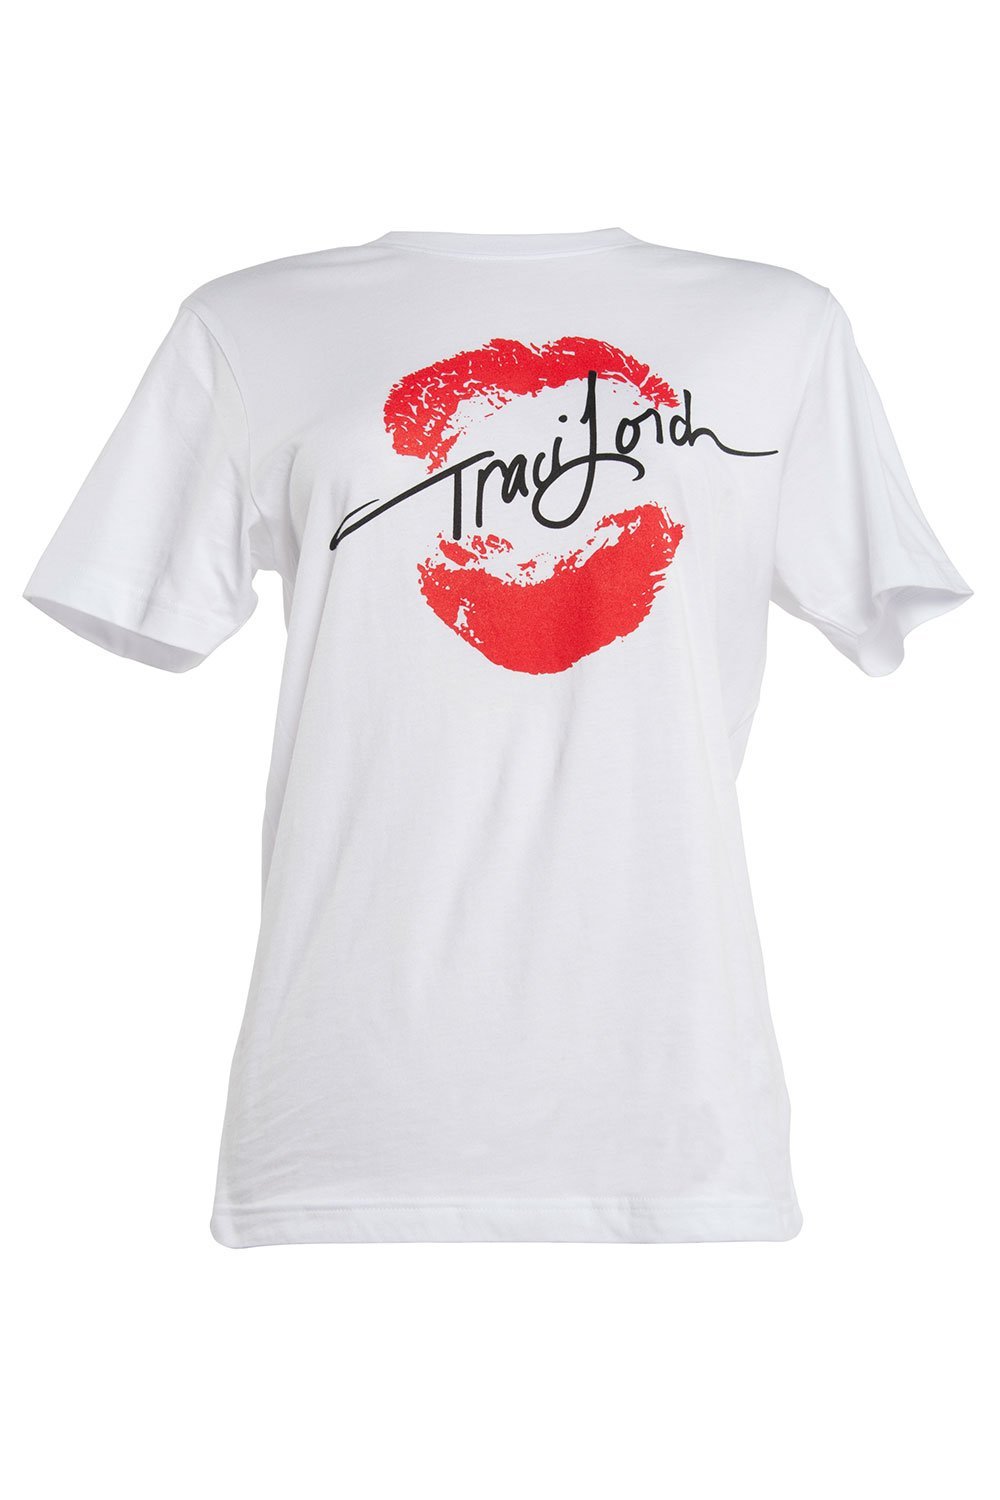 OYS -  Final Sale - Men's Signature T-shirt in White by Traci Lords